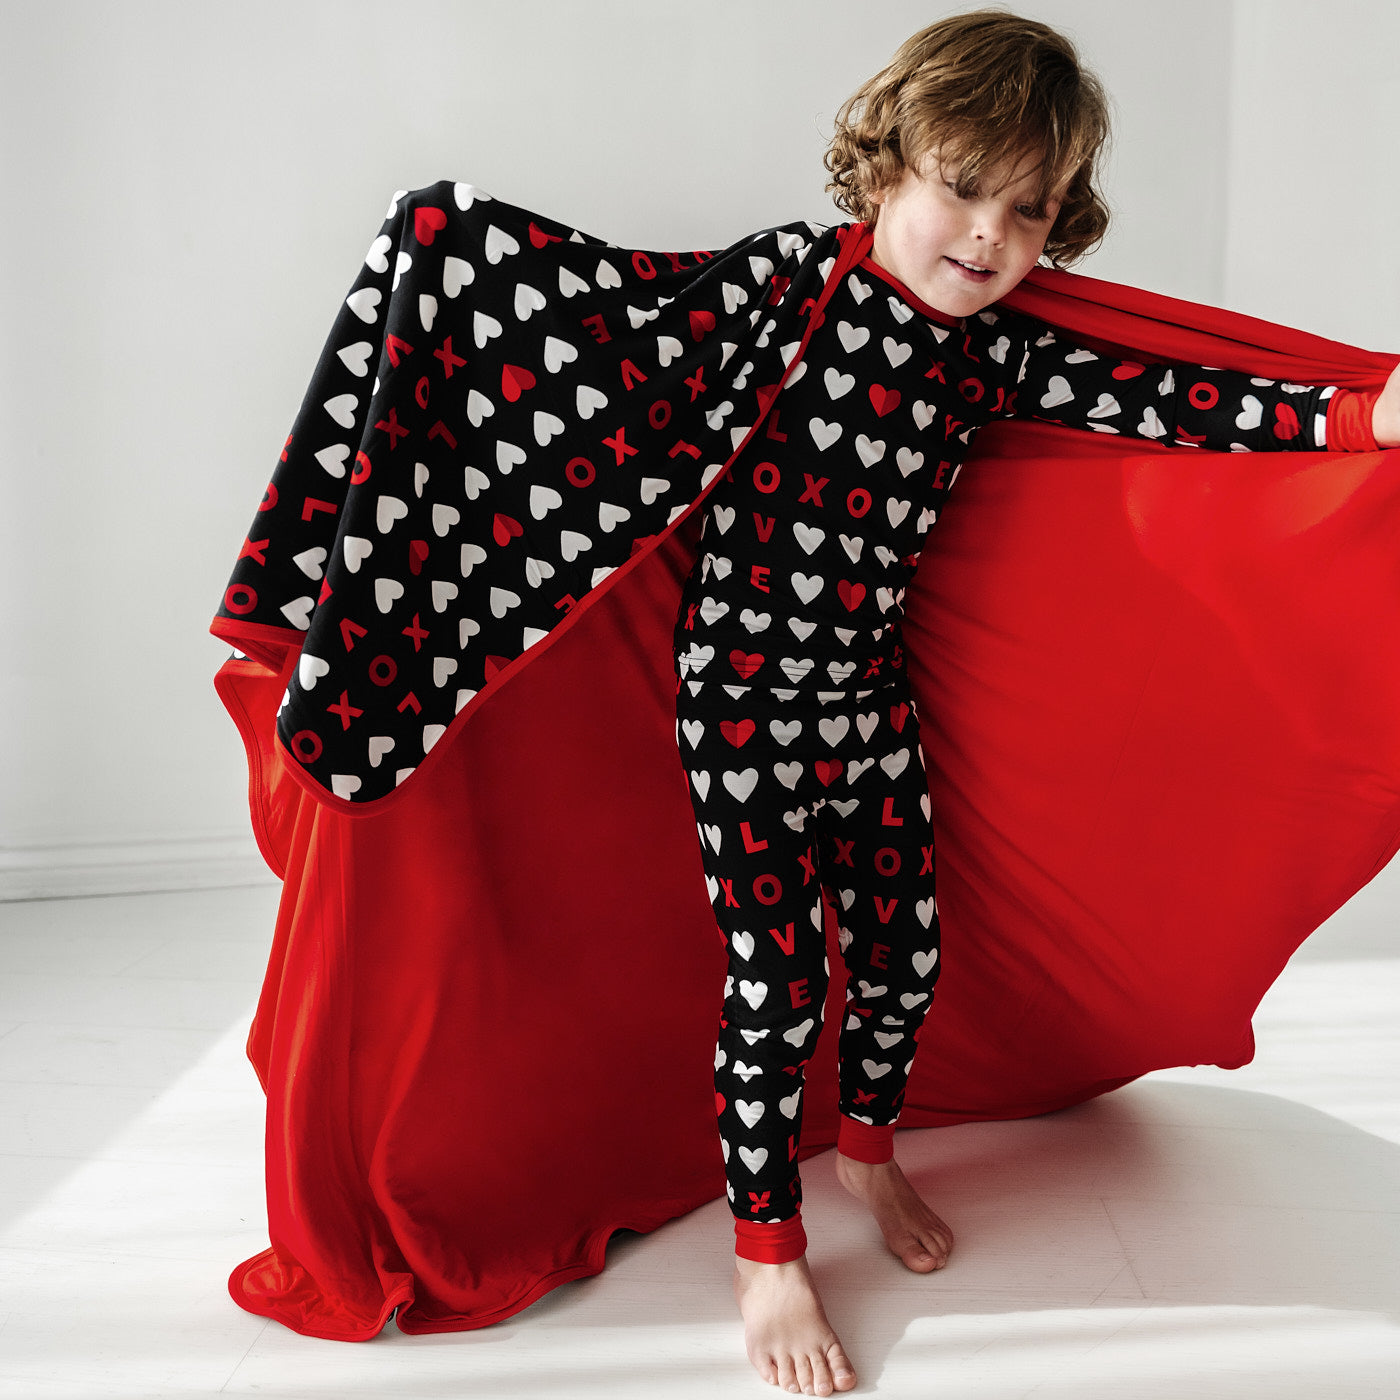 child running wearing a Black XOXO two piece pajama set holding up a matching large cloud blanket